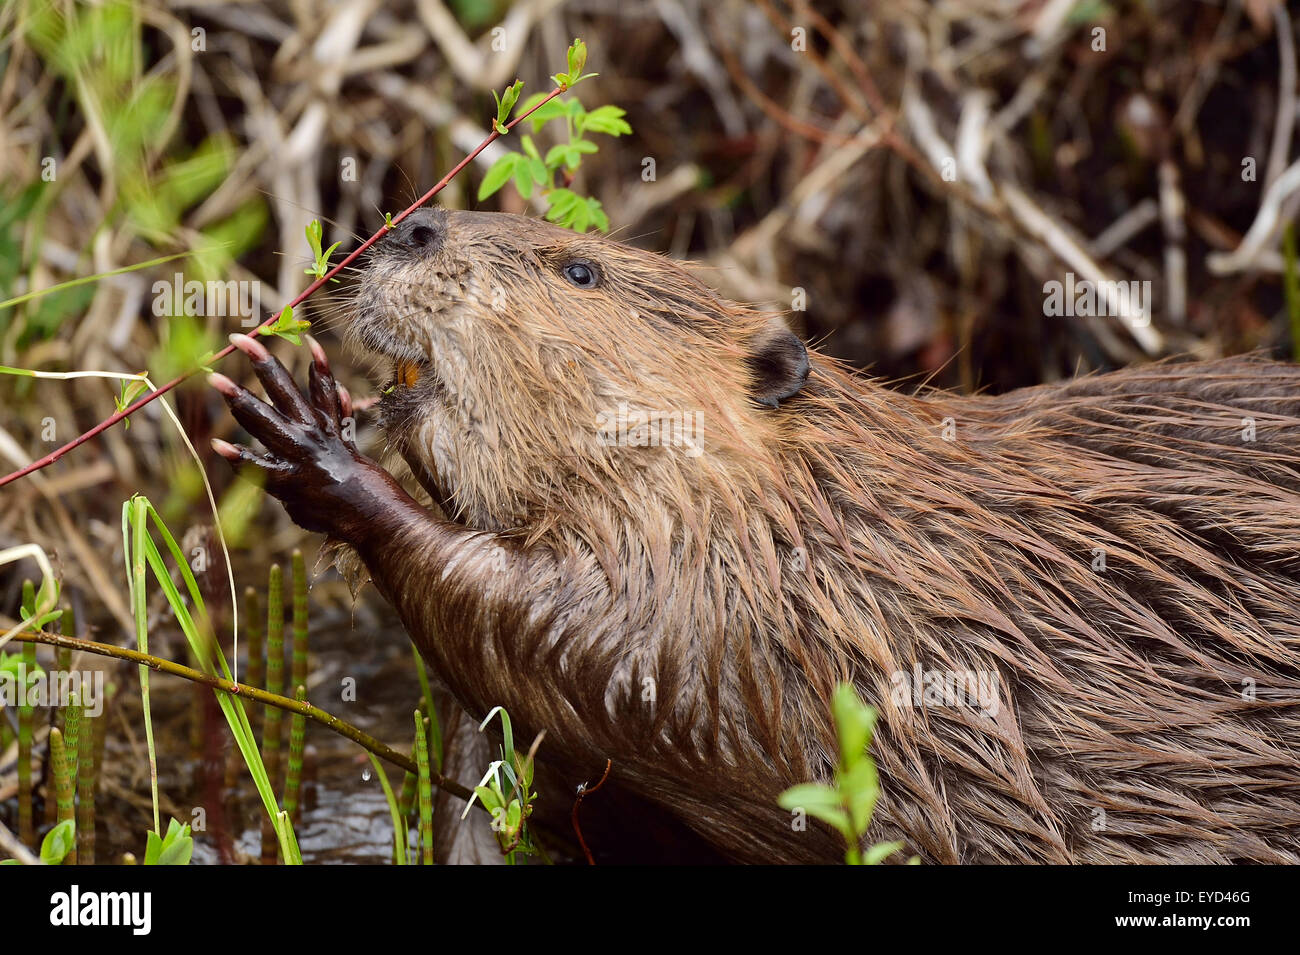 A close up image of a wild beaver 'Castor canadenis', with his paws streached out  reaching for a young sapling Stock Photo